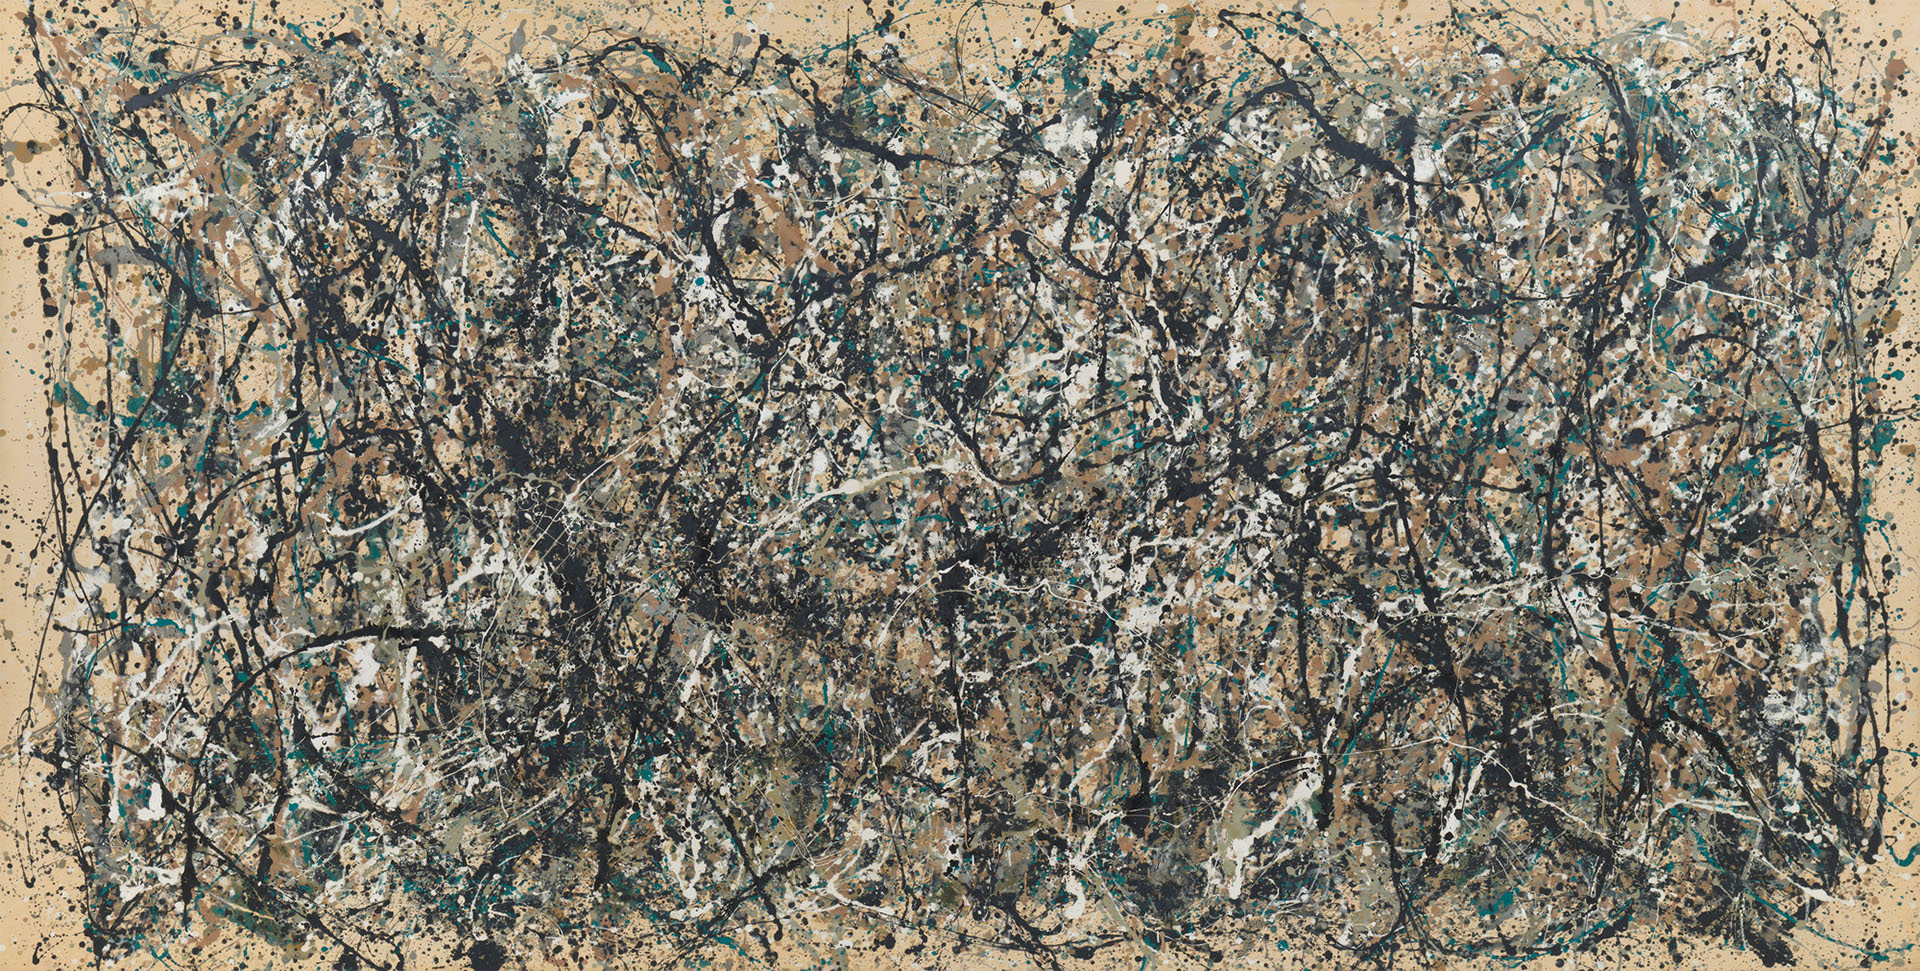 Pollock One: Number 31